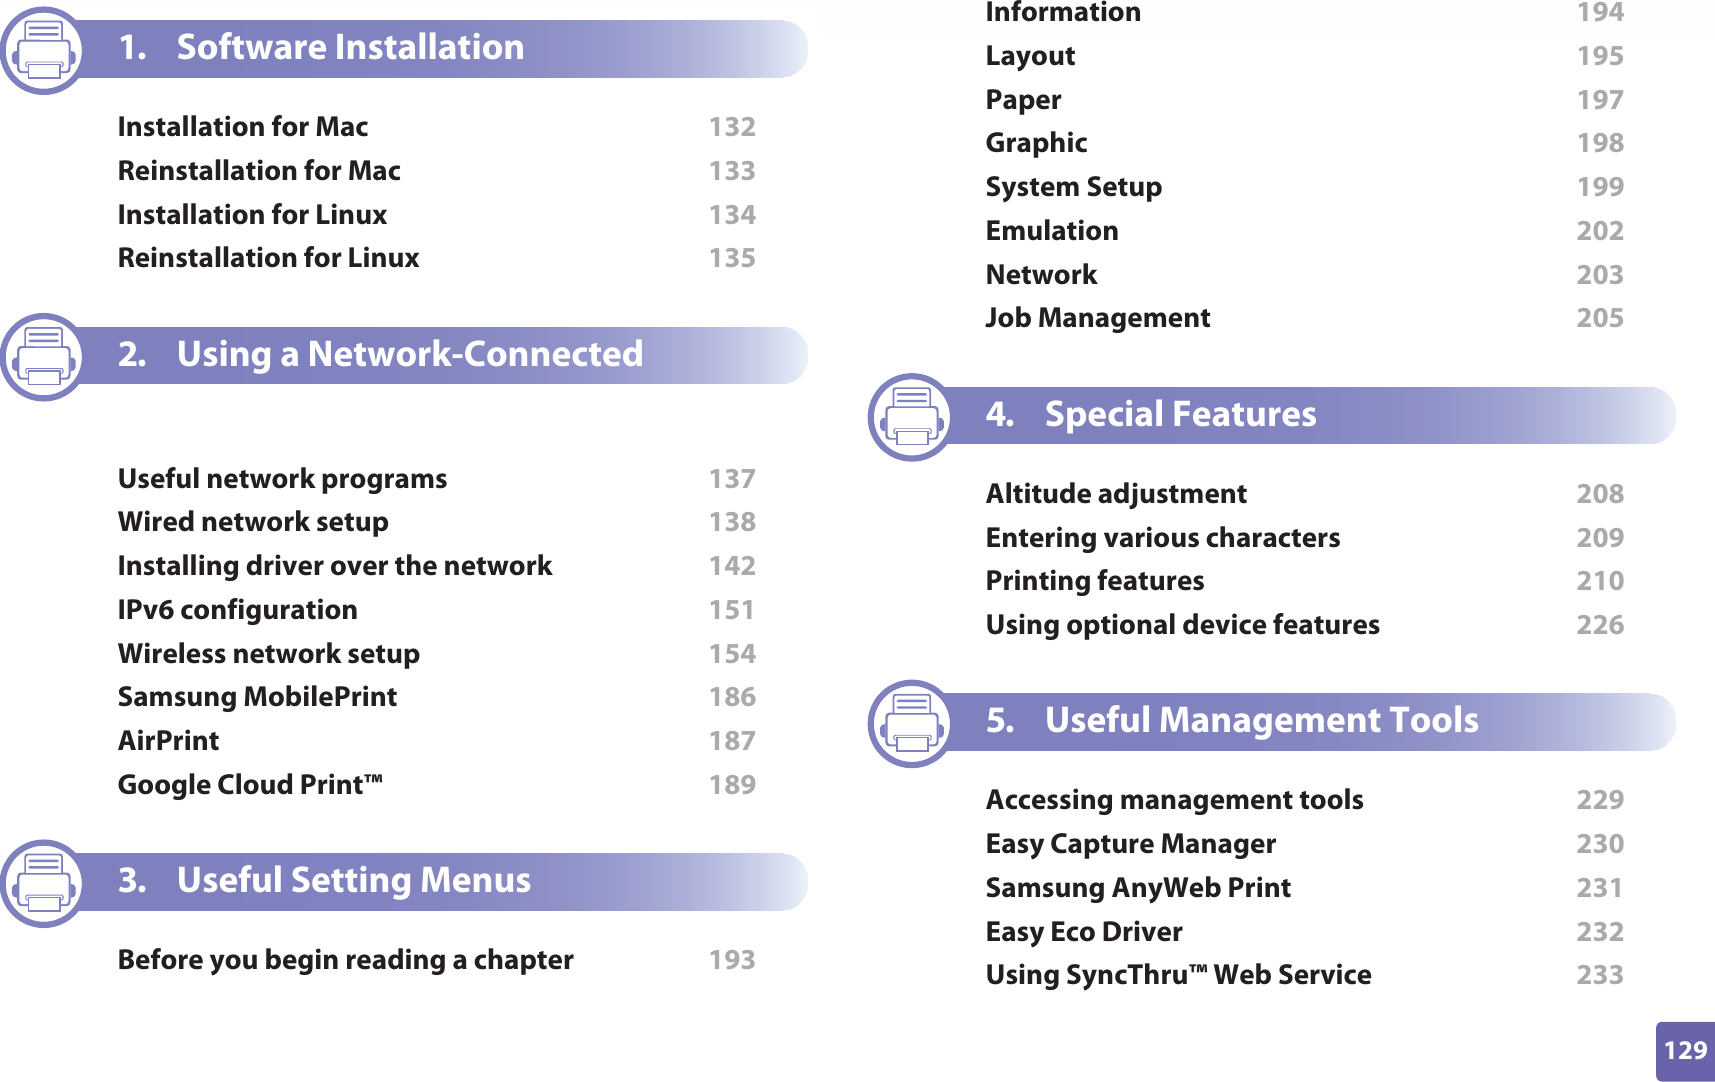 129ADVANCED1. Software InstallationInstallation for Mac  132Reinstallation for Mac  133Installation for Linux  134Reinstallation for Linux  1352. Using a Network-Connected MachineUseful network programs  137Wired network setup  138Installing driver over the network  142IPv6 configuration  151Wireless network setup  154Samsung MobilePrint  186AirPrint  187Google Cloud Print™  1893. Useful Setting MenusBefore you begin reading a chapter  193Information  194Layout  195Paper  197Graphic  198System Setup  199Emulation  202Network  203Job Management  2054. Special FeaturesAltitude adjustment  208Entering various characters  209Printing features  210Using optional device features  2265. Useful Management ToolsAccessing management tools  229Easy Capture Manager  230Samsung AnyWeb Print  231Easy Eco Driver  232Using SyncThru™ Web Service  233